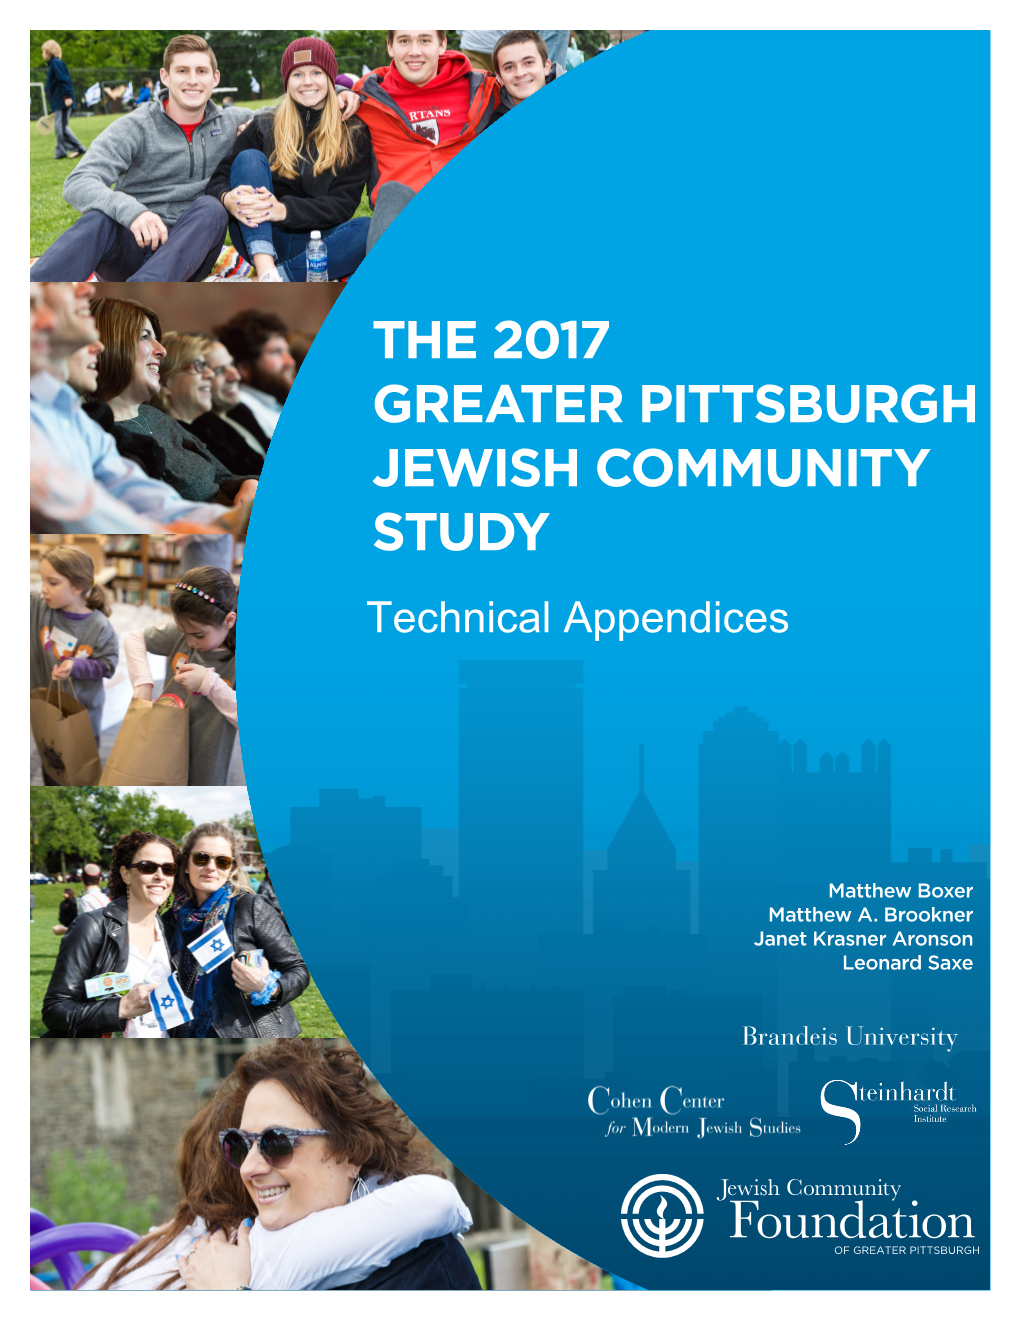 THE 2017 GREATER PITTSBURGH JEWISH COMMUNITY STUDY Technical Appendices